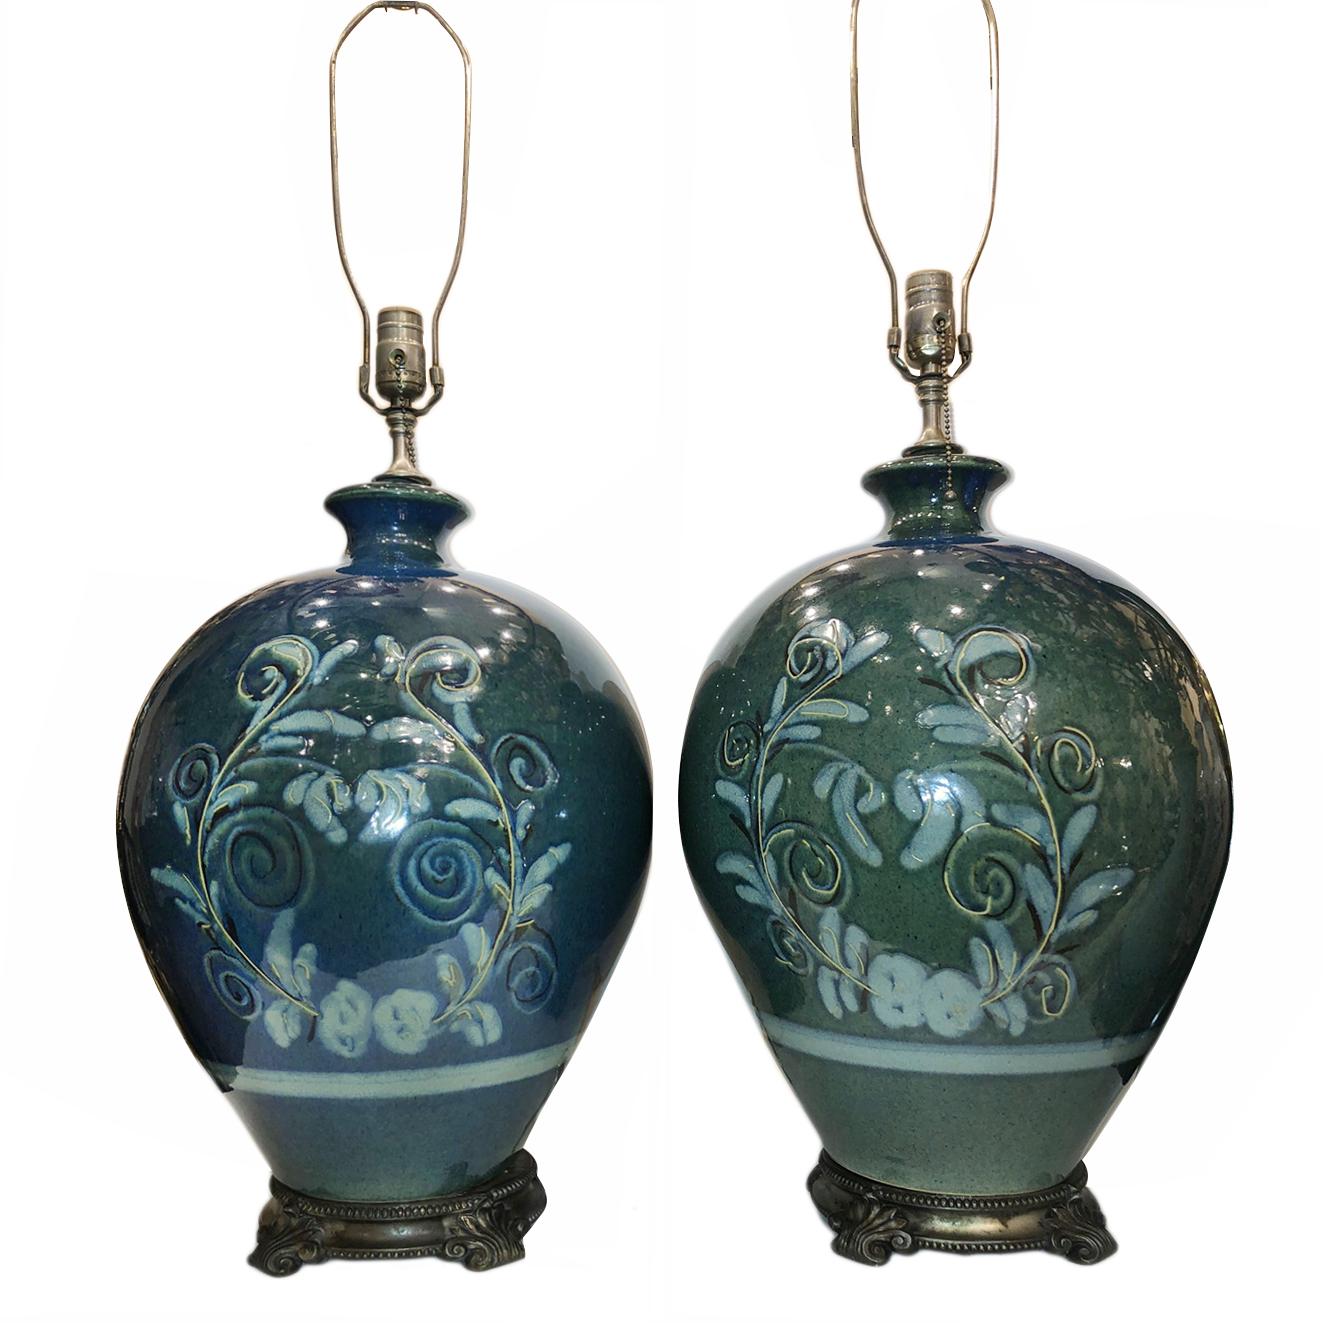 Pair of circa 1960s French hand painted porcelain lamps with silvered bronze bases.

Measurements:
Height of body 21